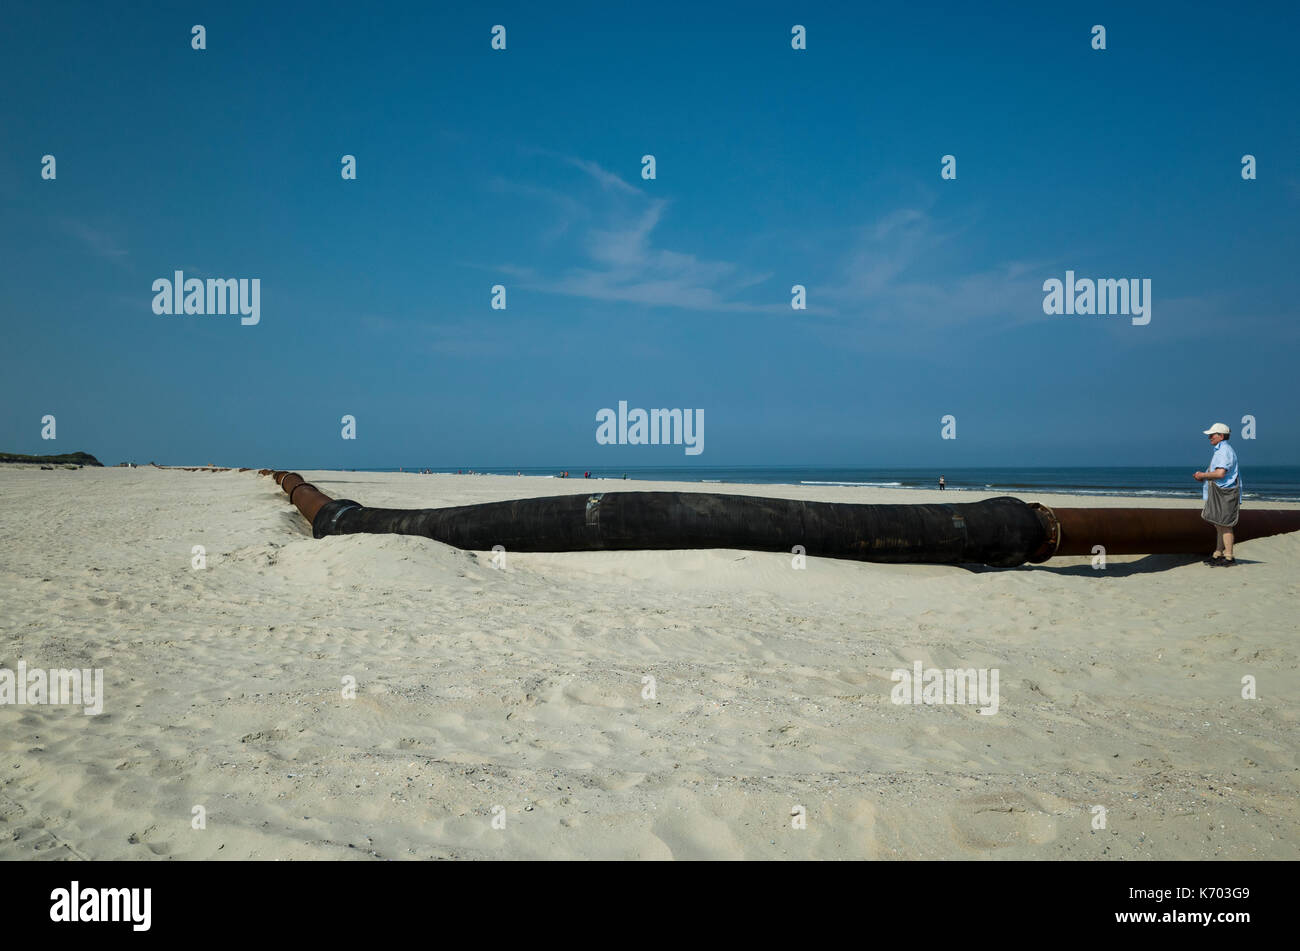 Am Strand, Langeoog.  Deutschland.  Germany.  A tourist inspects the commercial pipeline used as part of the active beach rebuilding, Strandaufschüttung.  It's the scale of the pipeline and breadth of the sandy beach become apparent. Stock Photo